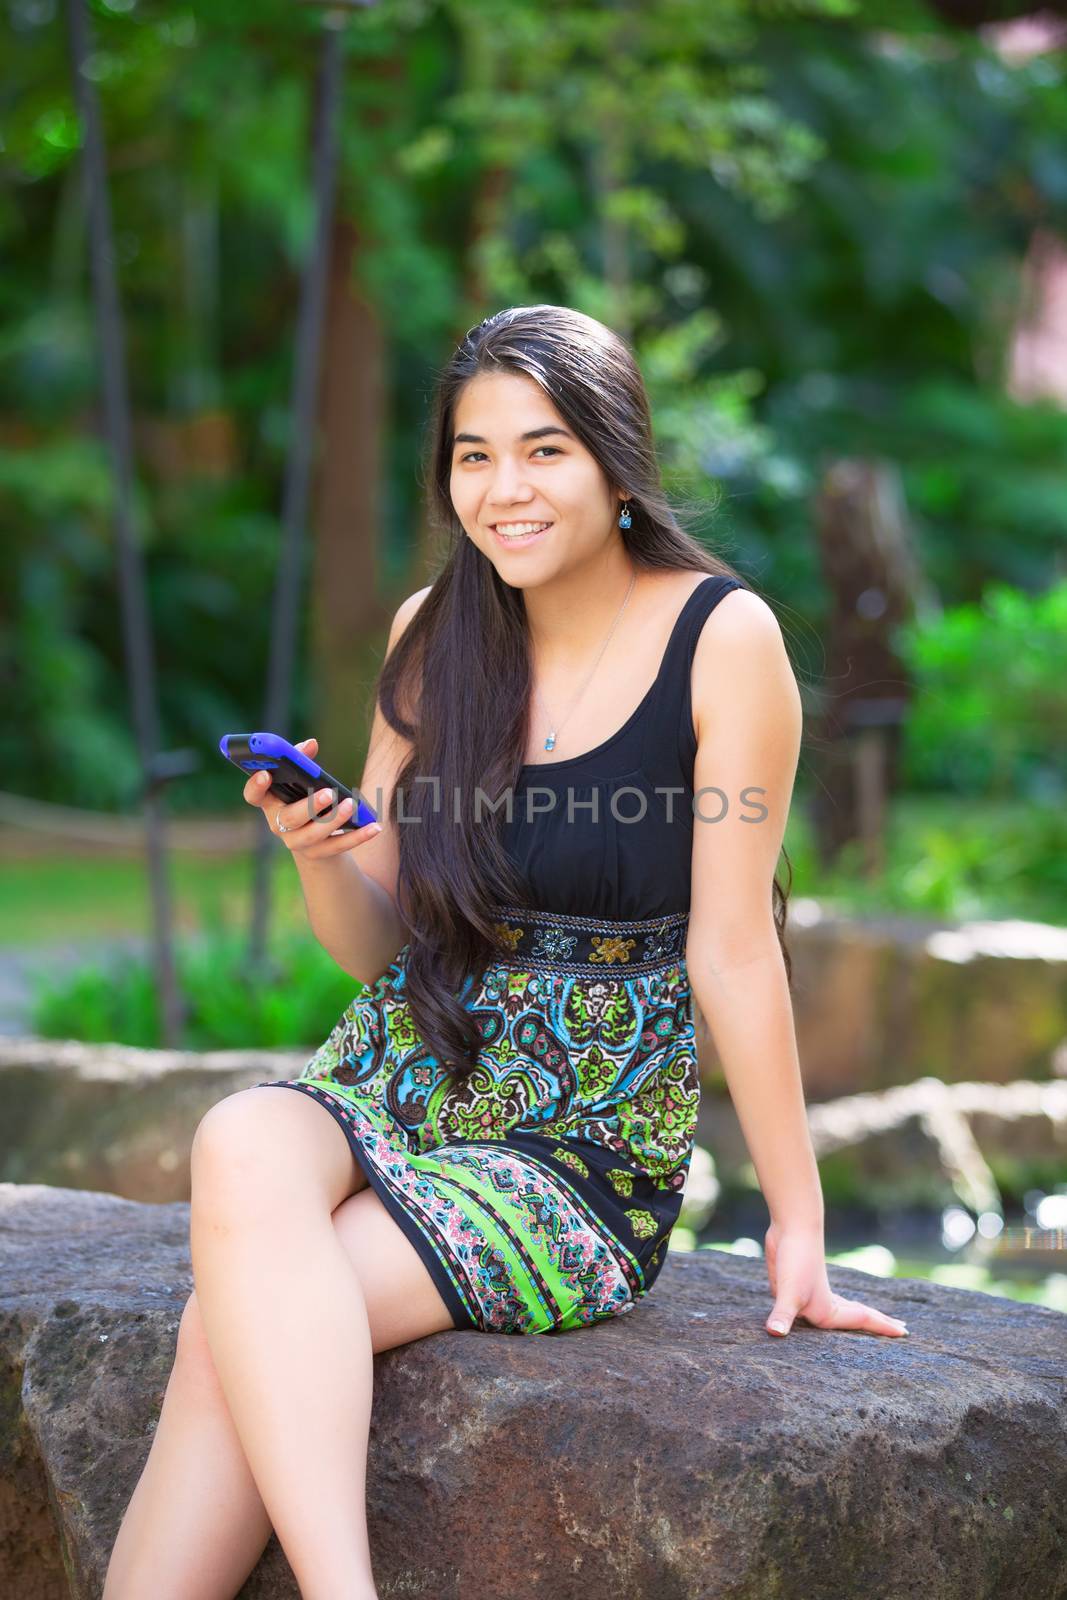 Beautiful biracial Asian Caucasian teen girl sitting on rock in tropical setting looking at cellphone, palm trees in background